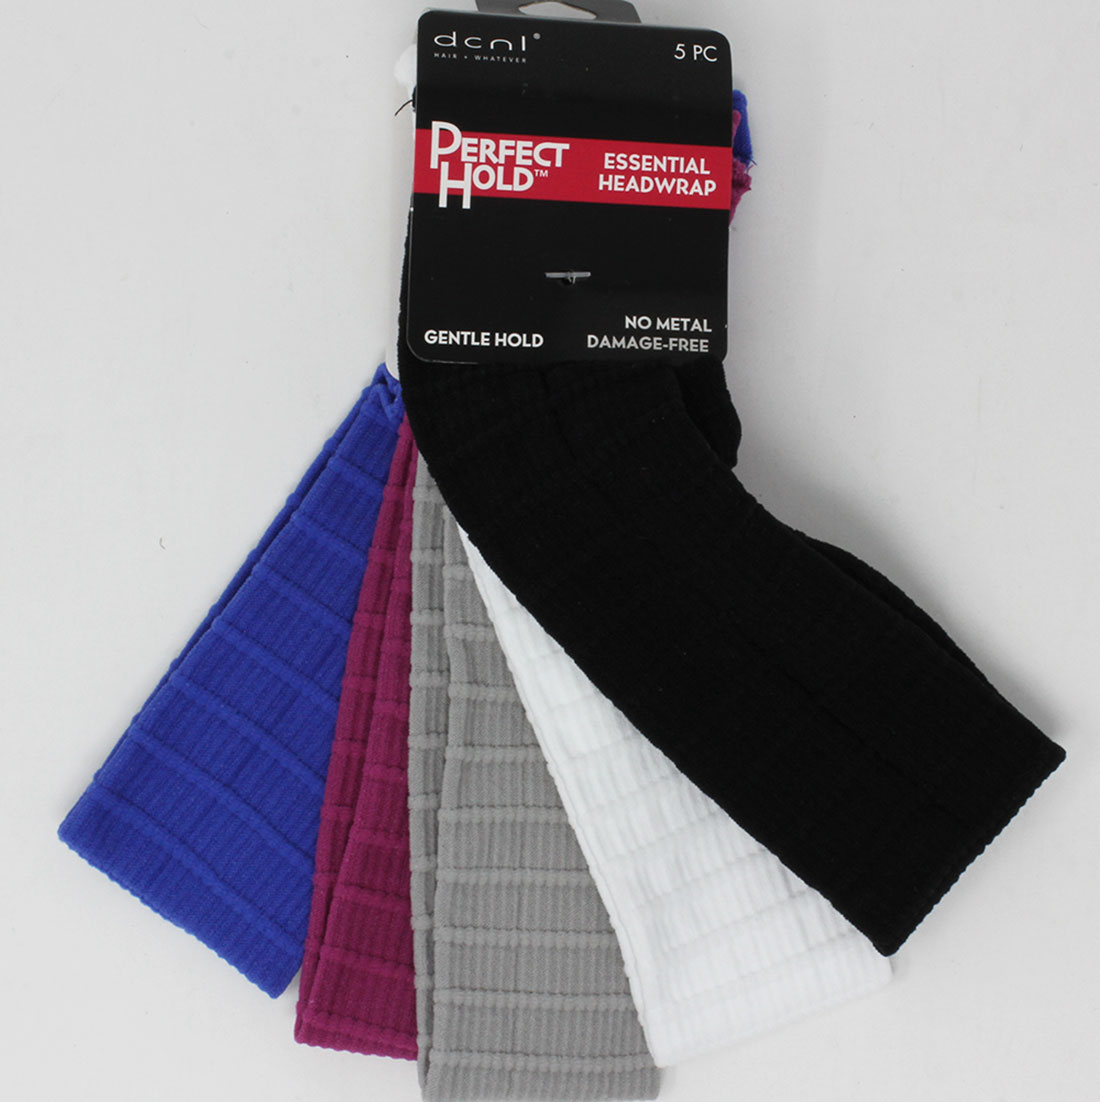 DCNL ESSENTIALS 5 PACK HEADWRAPS - Click Image to Close